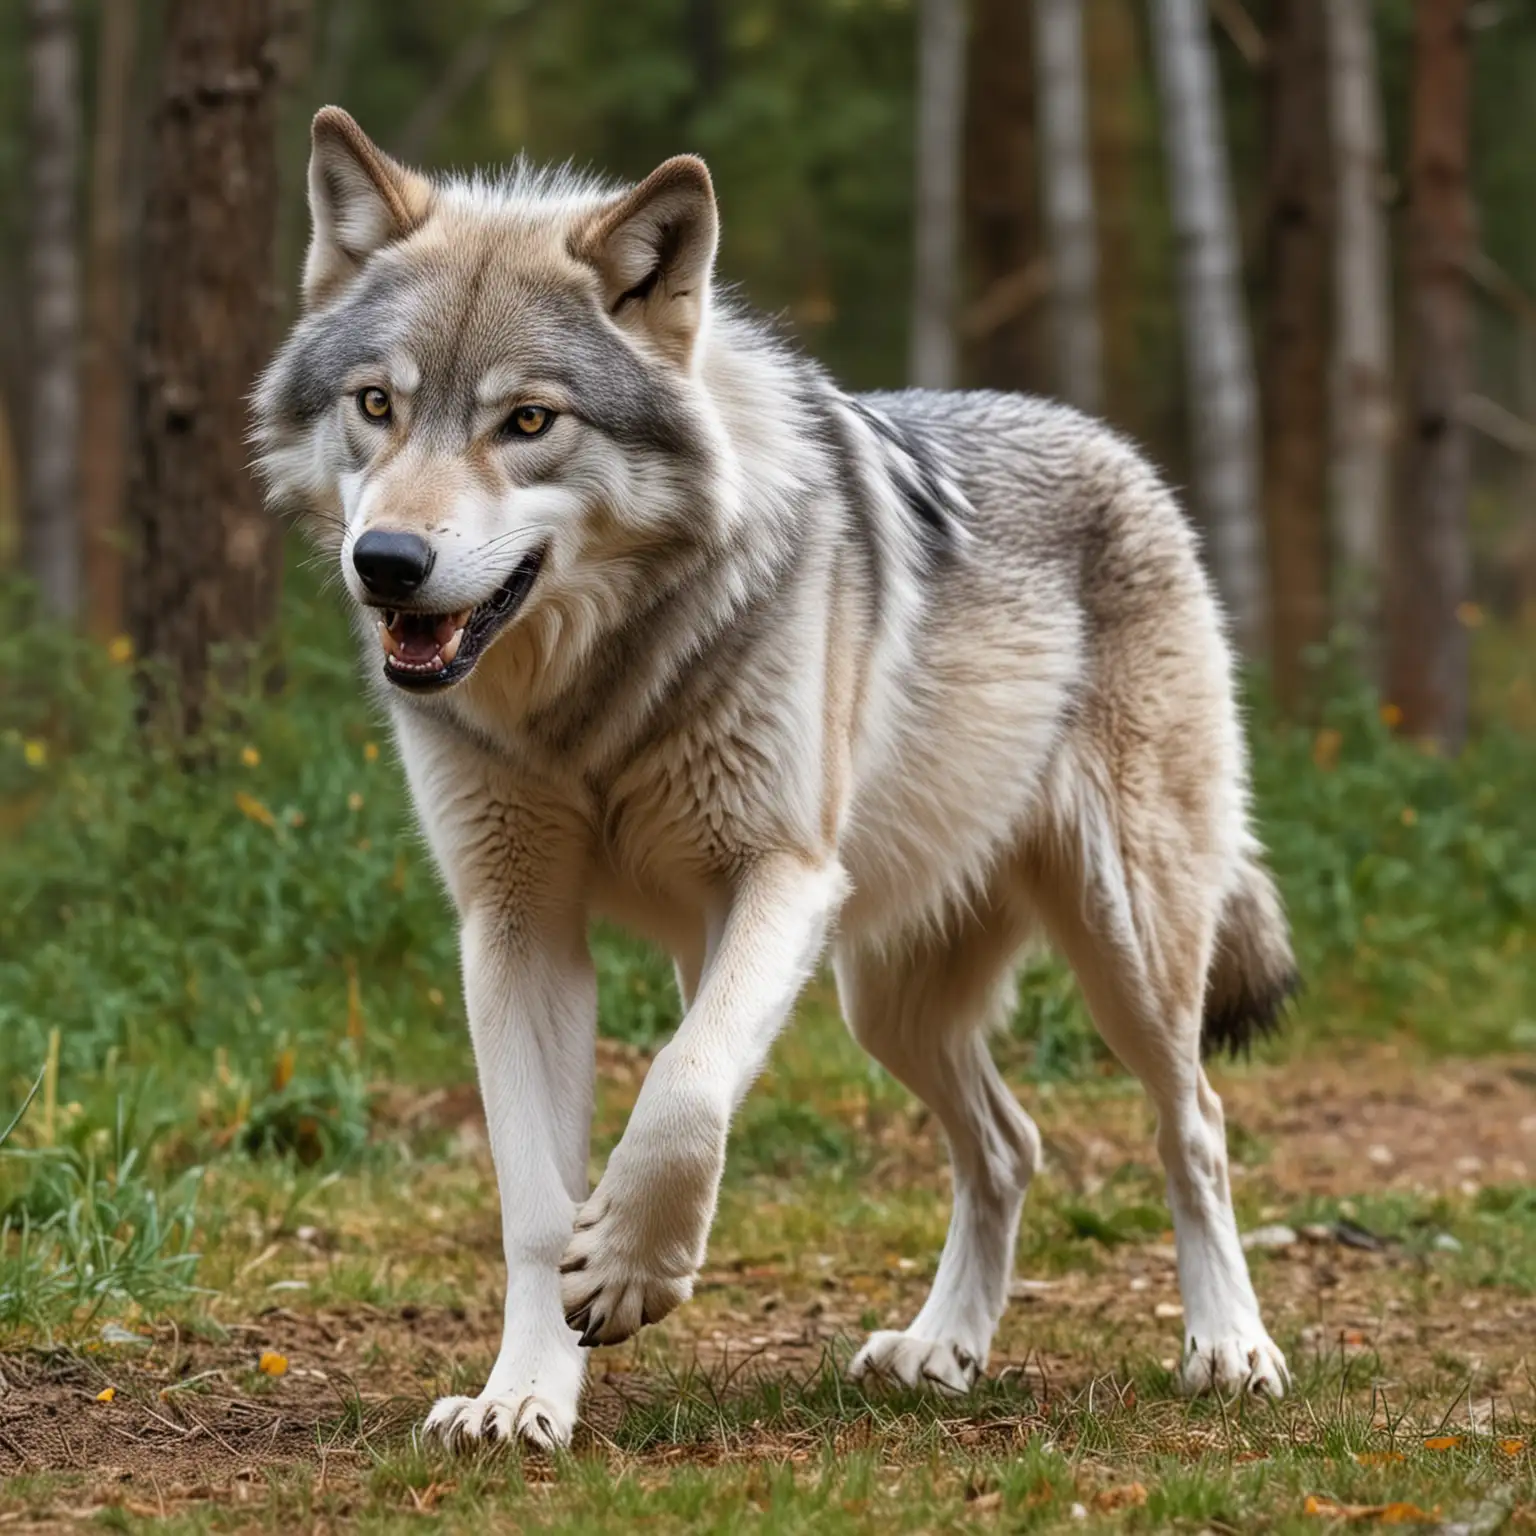 Playful Grey Wolf in Forest Clearing